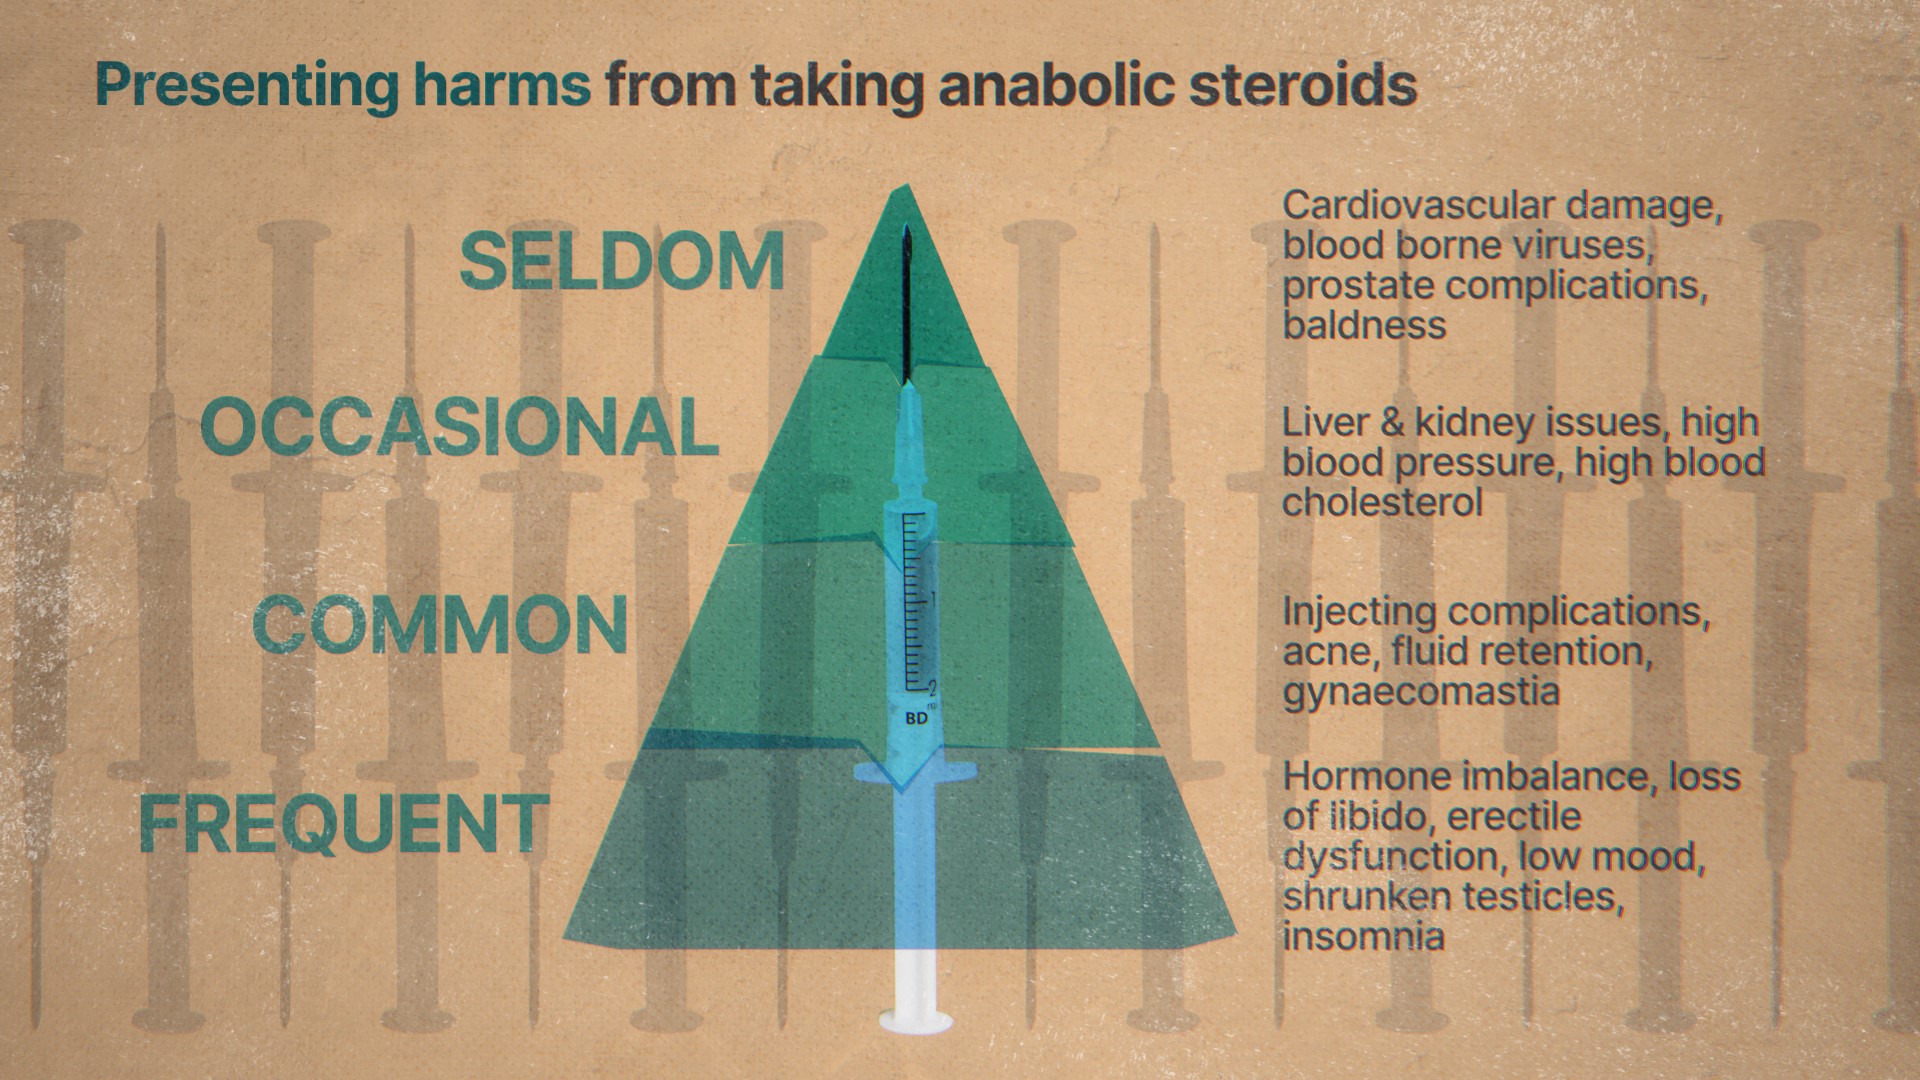 The harms of taking anabolic steroids